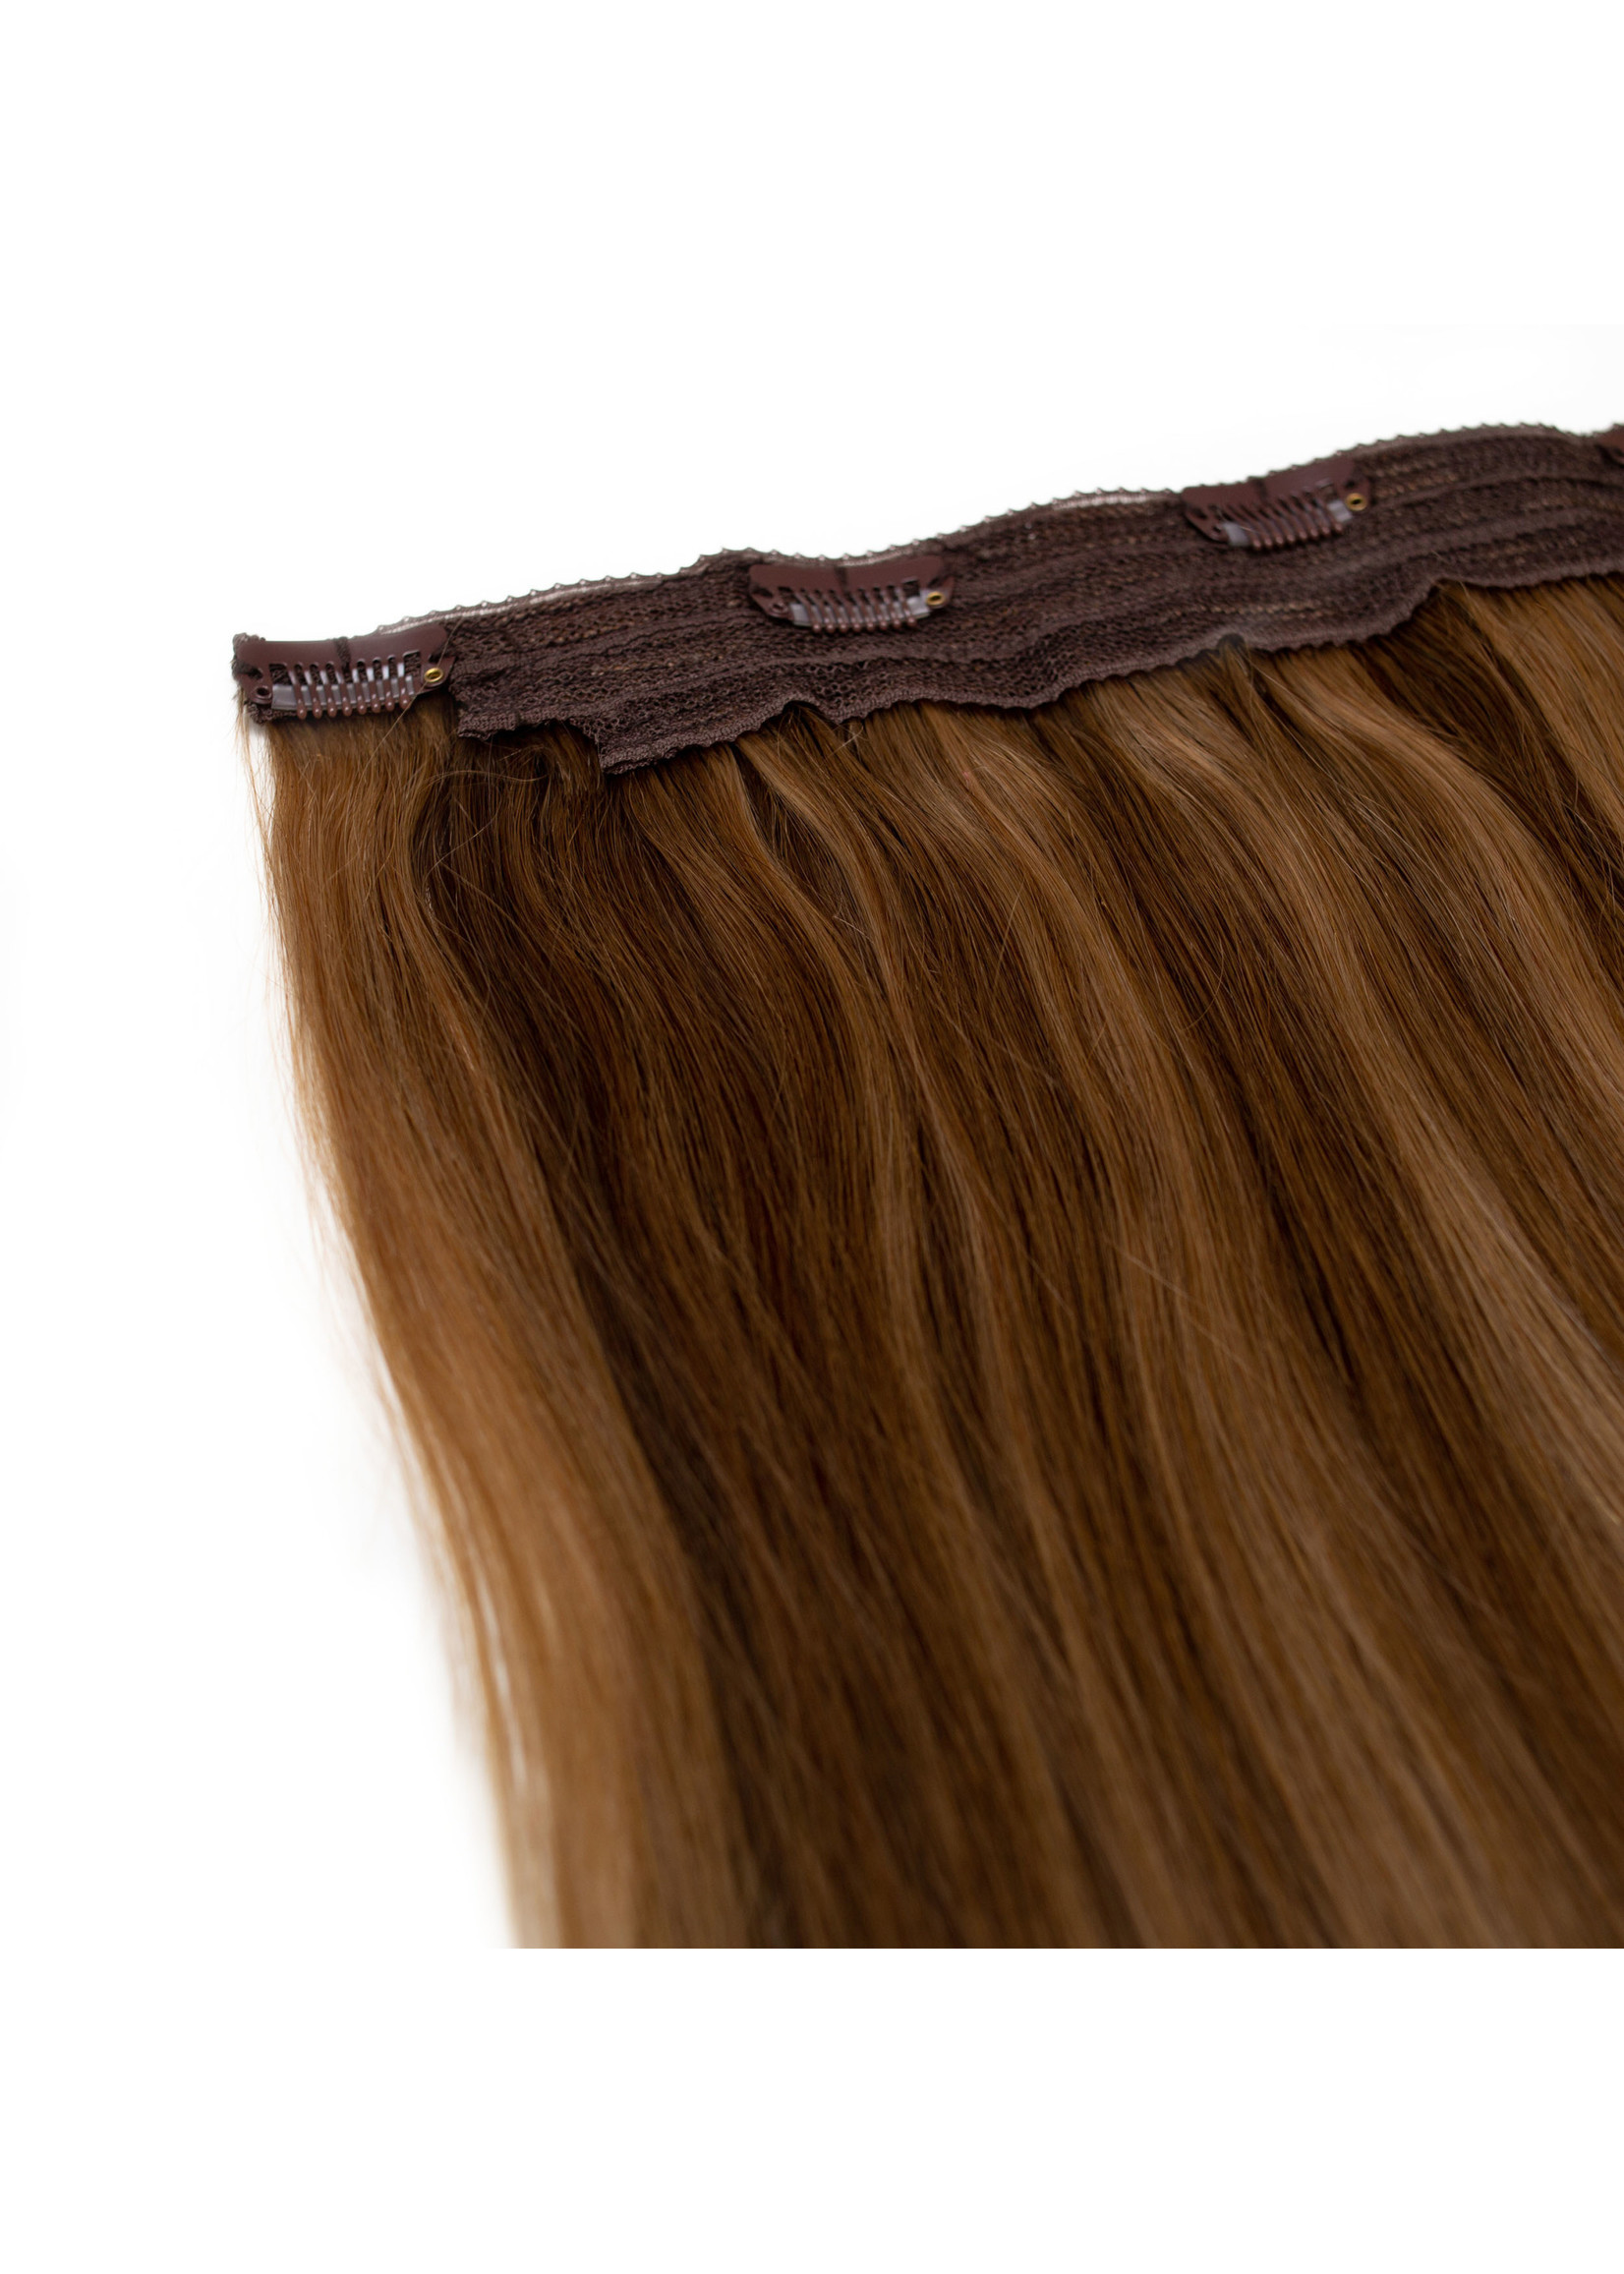 Seamless1 Seamless1 Fibre Clip-in Hair Extensions 22 Inches - Caramel Blend